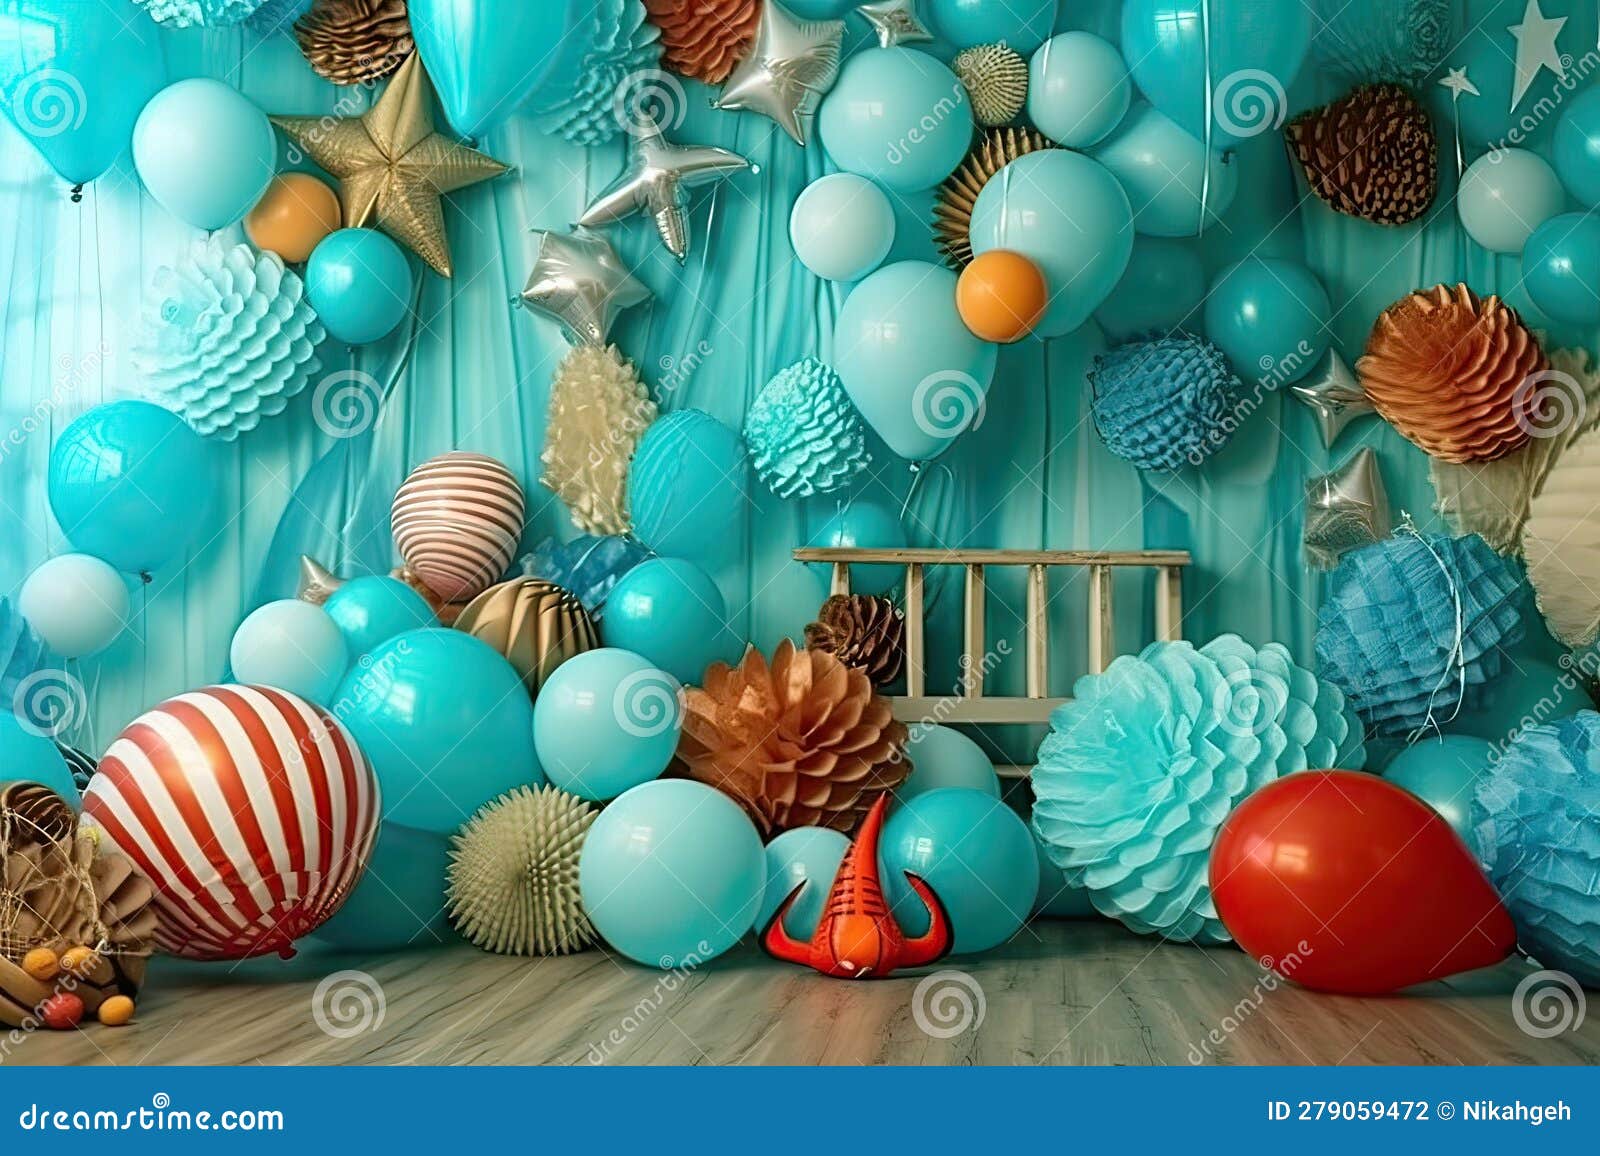 Ballon Decoration Wall Party Kids in the Home Ocean Theme Stock  Illustration - Illustration of theme, ocean: 279059472